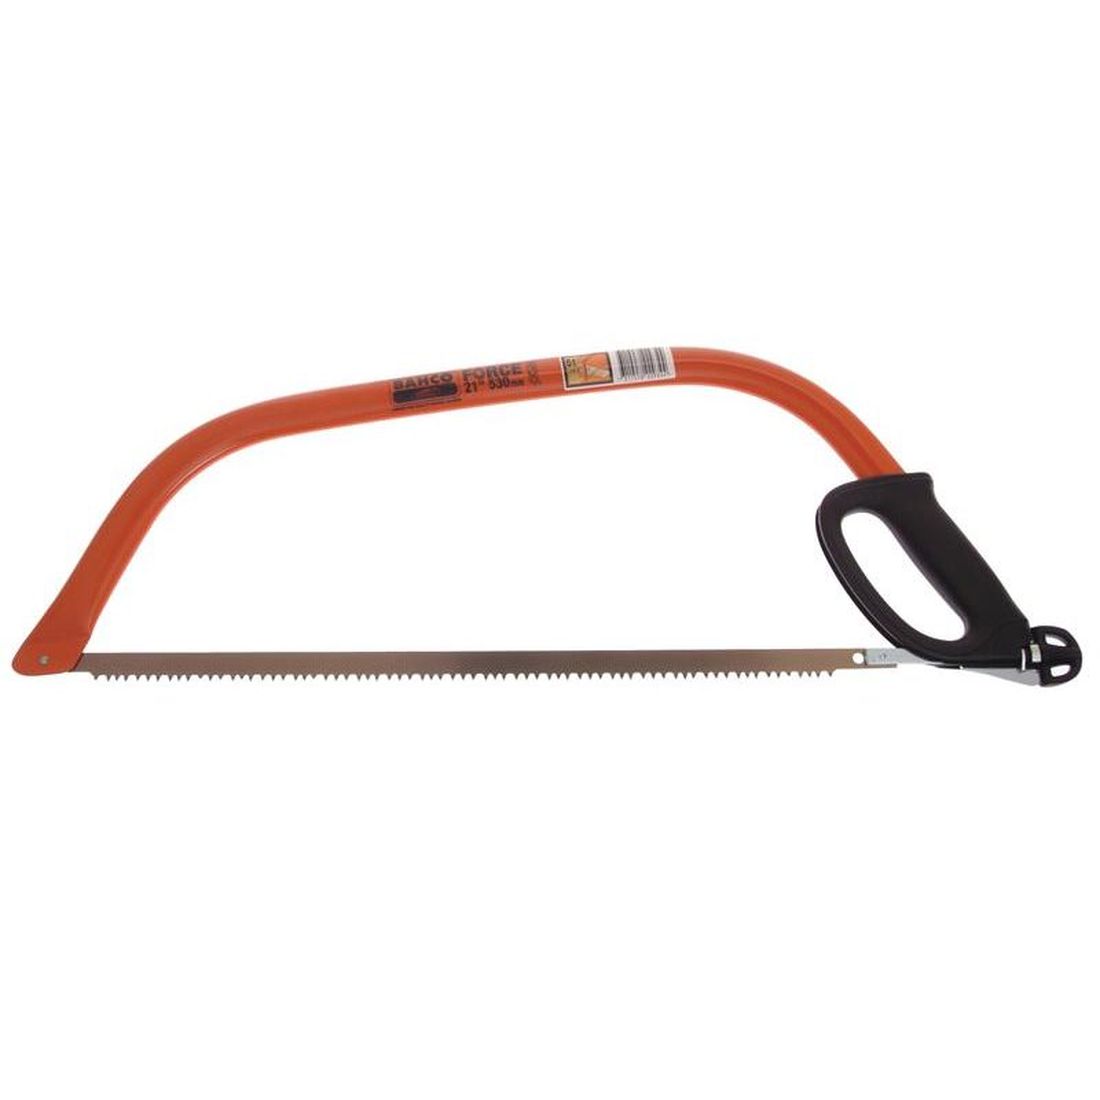 Bahco 10-21-51 Bowsaw 530mm (21in)      